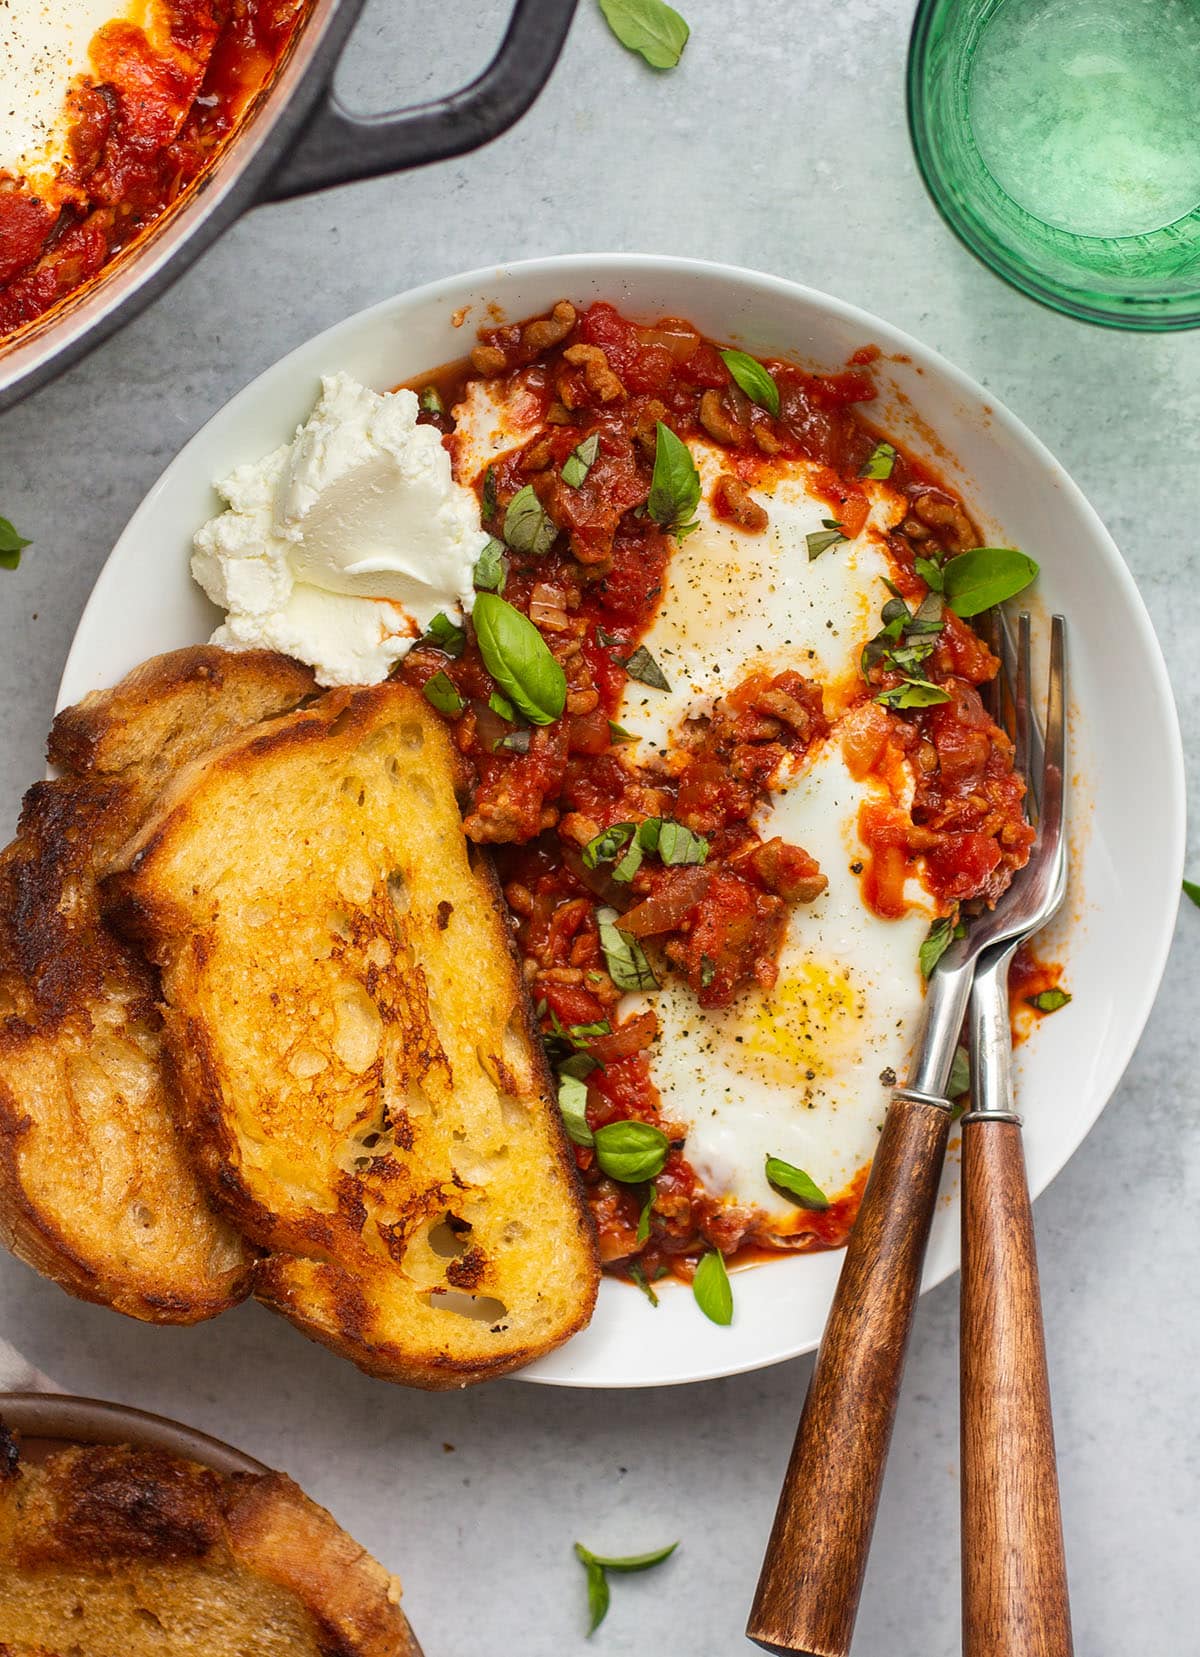 Baked eggs in a shallow white bowl with sourdough toast and whipped goat cheese.